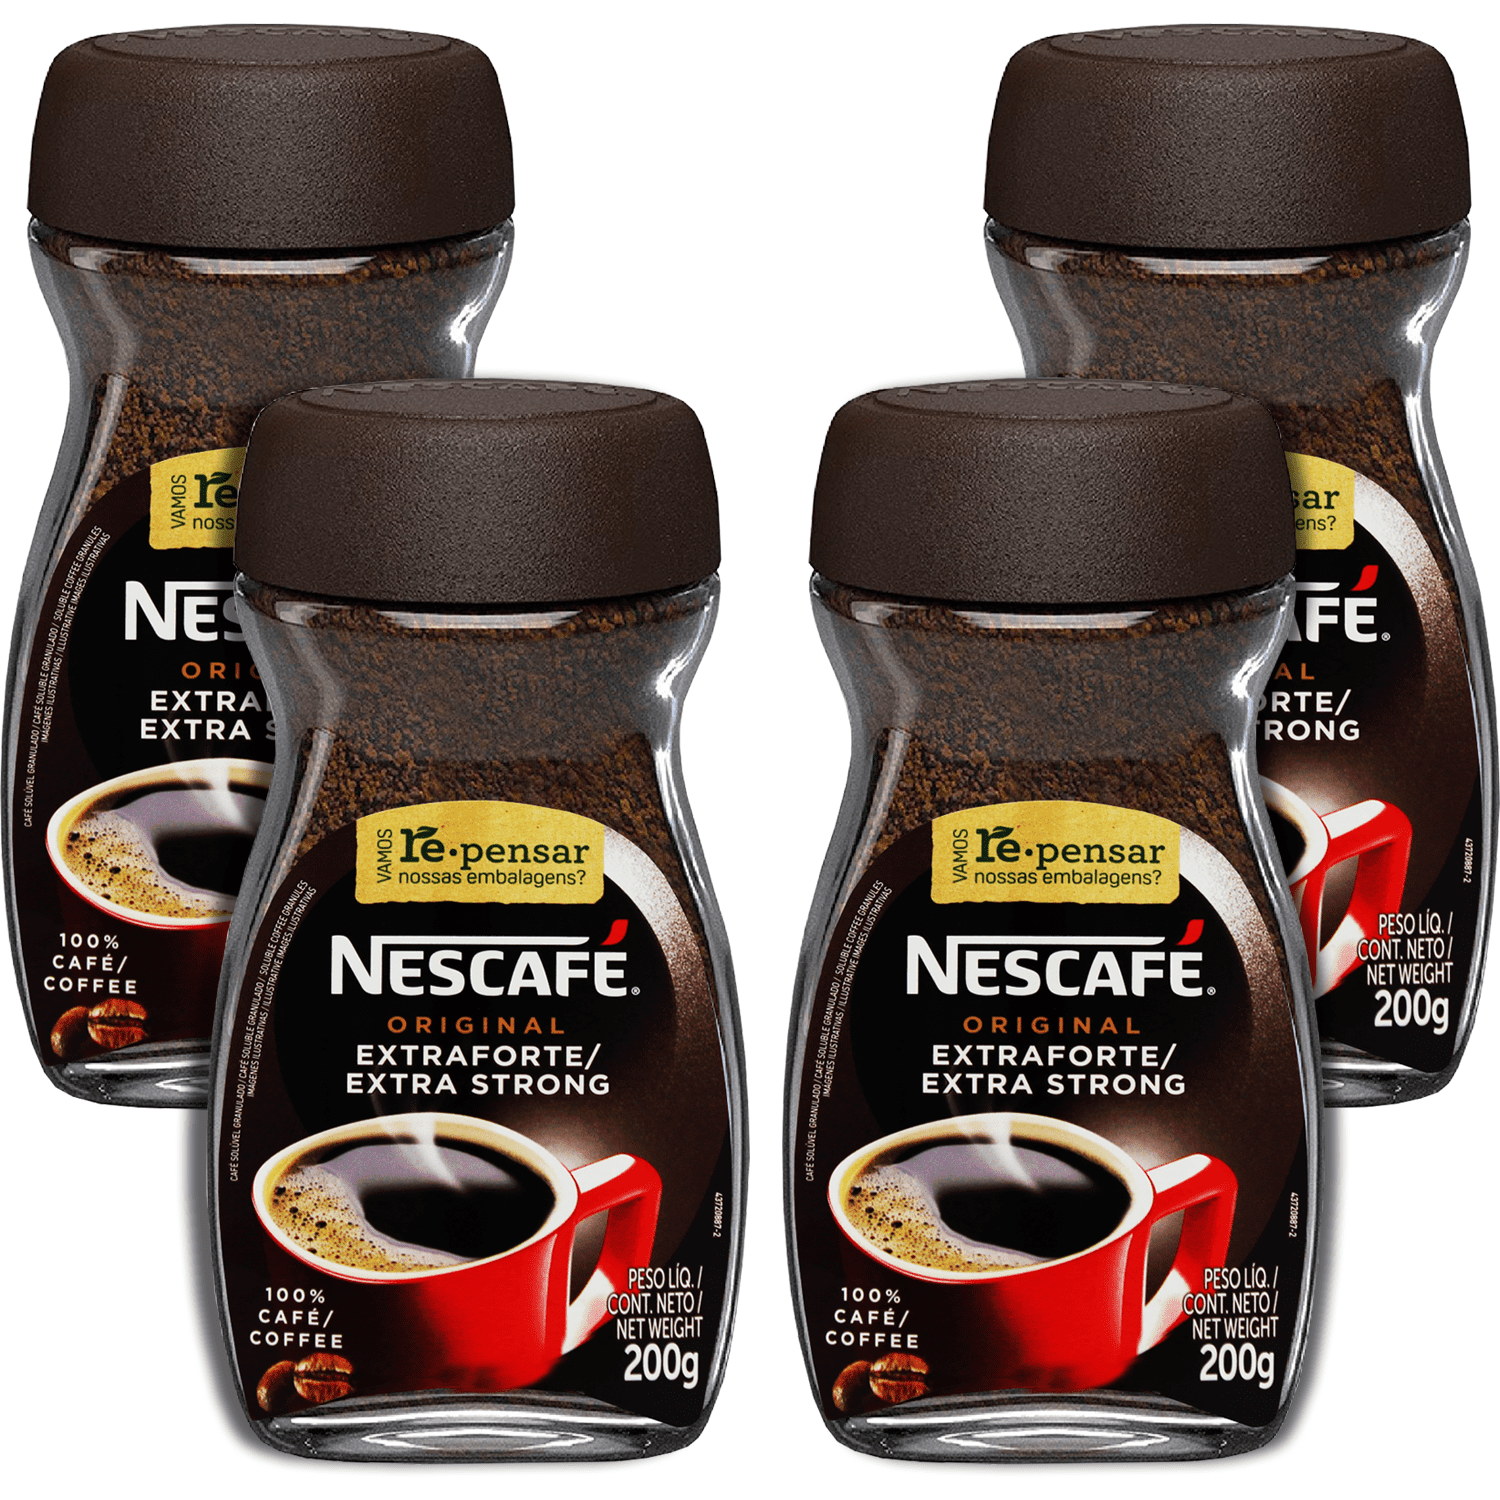 NESCAFE Extra Strong Instant Coffee 7 Ounce/200g (Pack of 4), Bulk